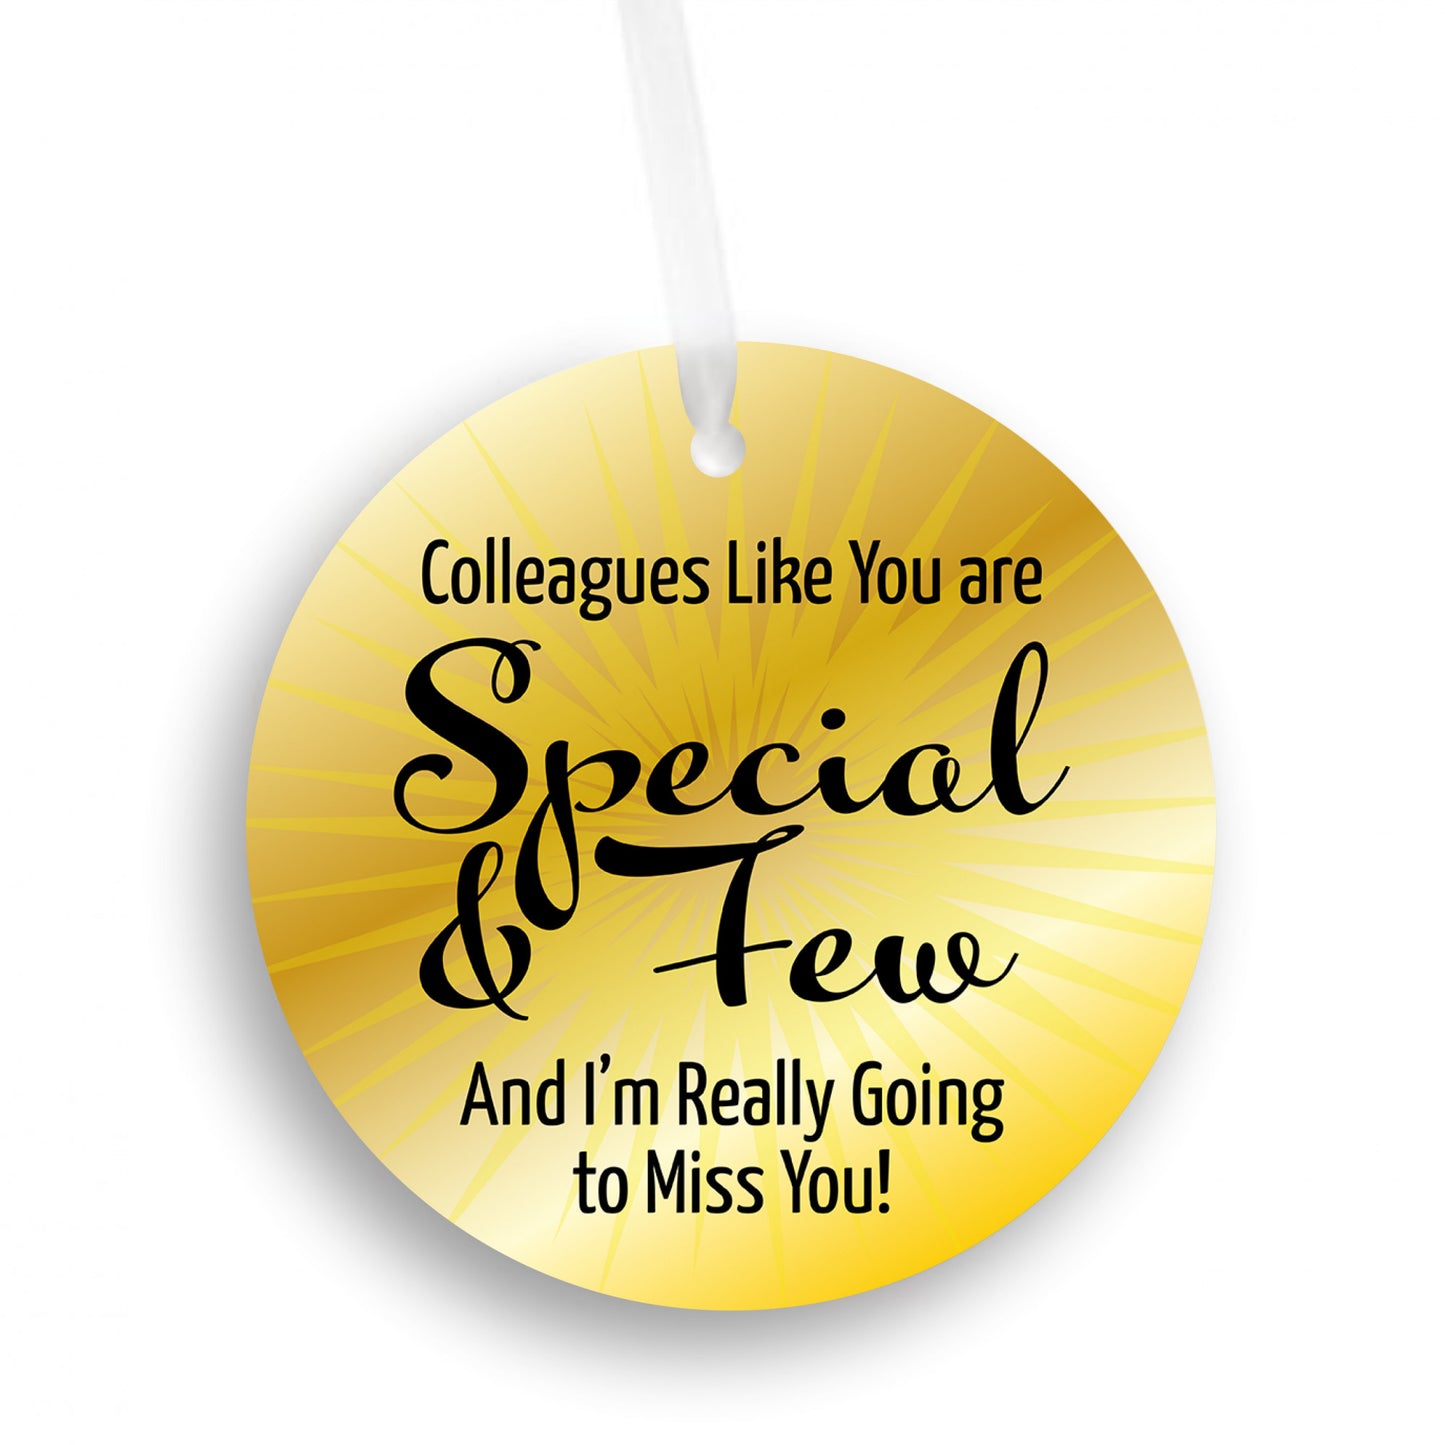 Colleagues Like You Are Special & Few Ornament